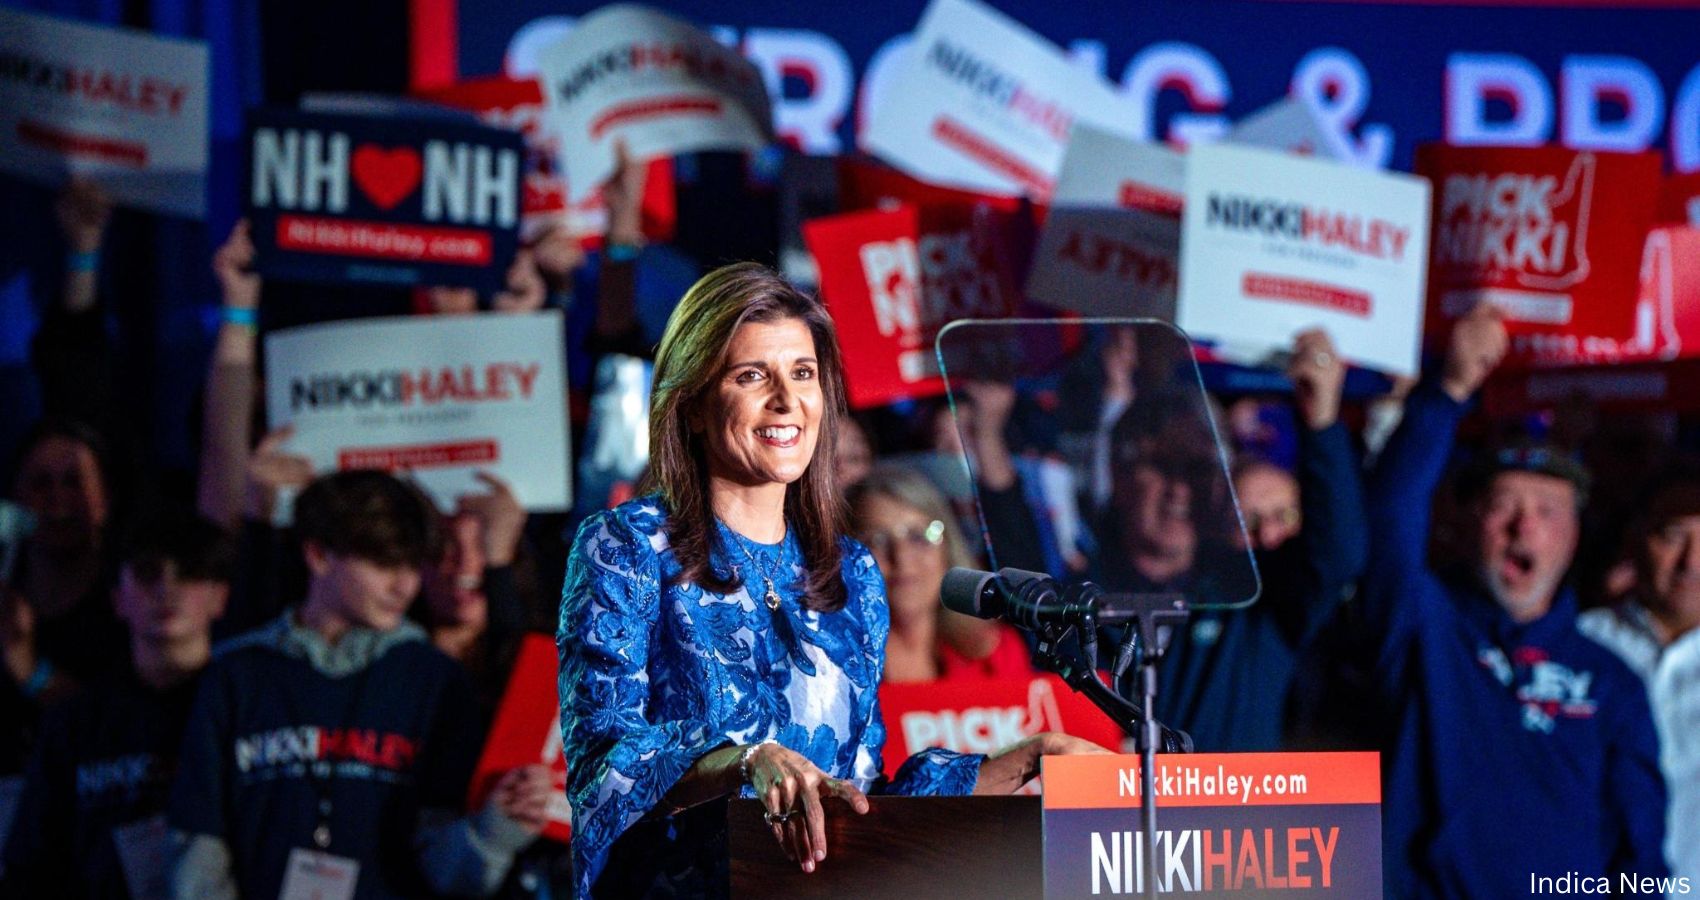 “She’s resilient”: Indian Americans react to Nikki Haley’s campaign after Iowa and New Hampshire